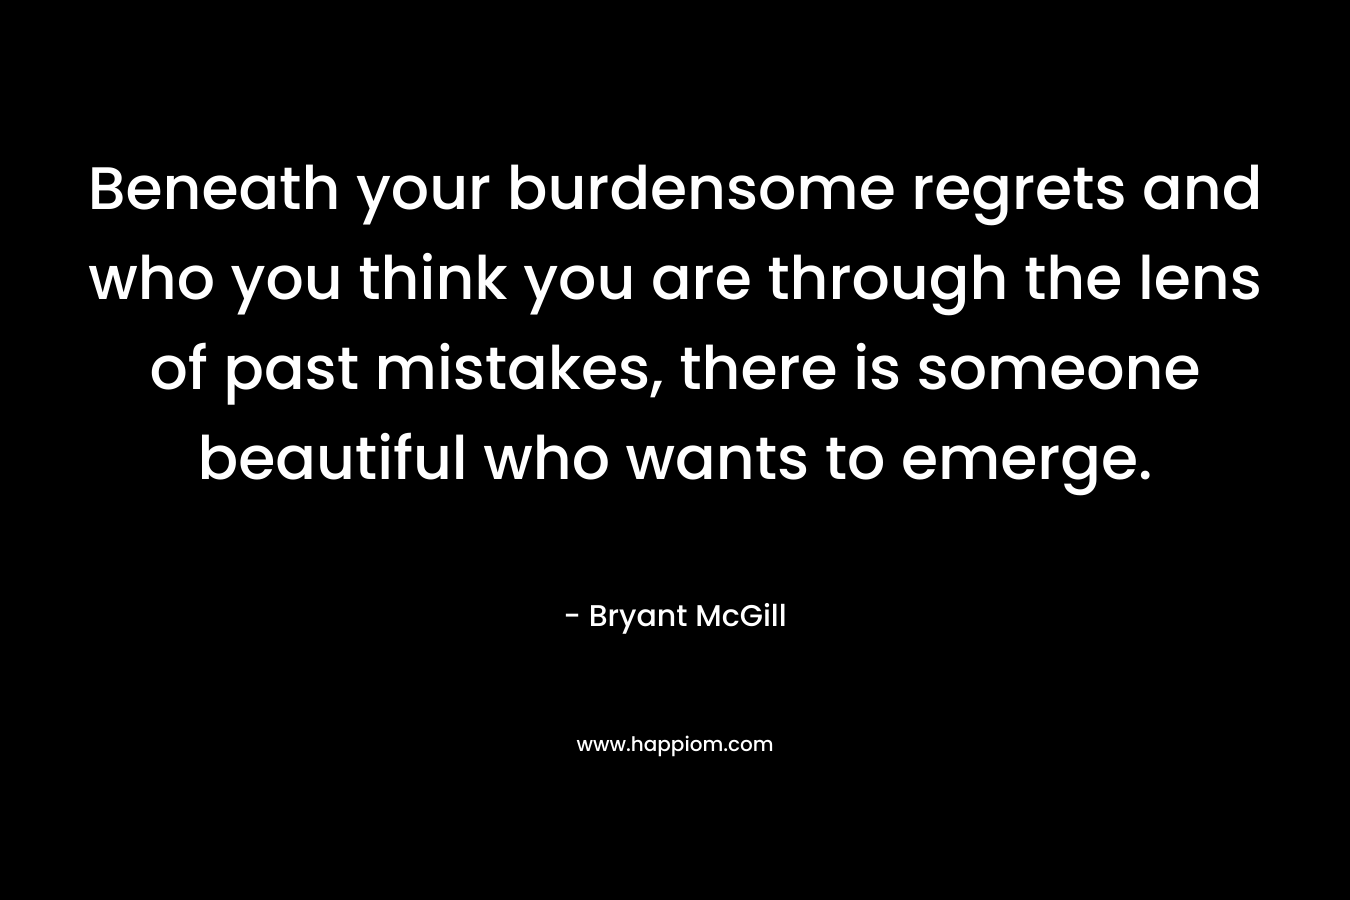 Beneath your burdensome regrets and who you think you are through the lens of past mistakes, there is someone beautiful who wants to emerge. – Bryant McGill